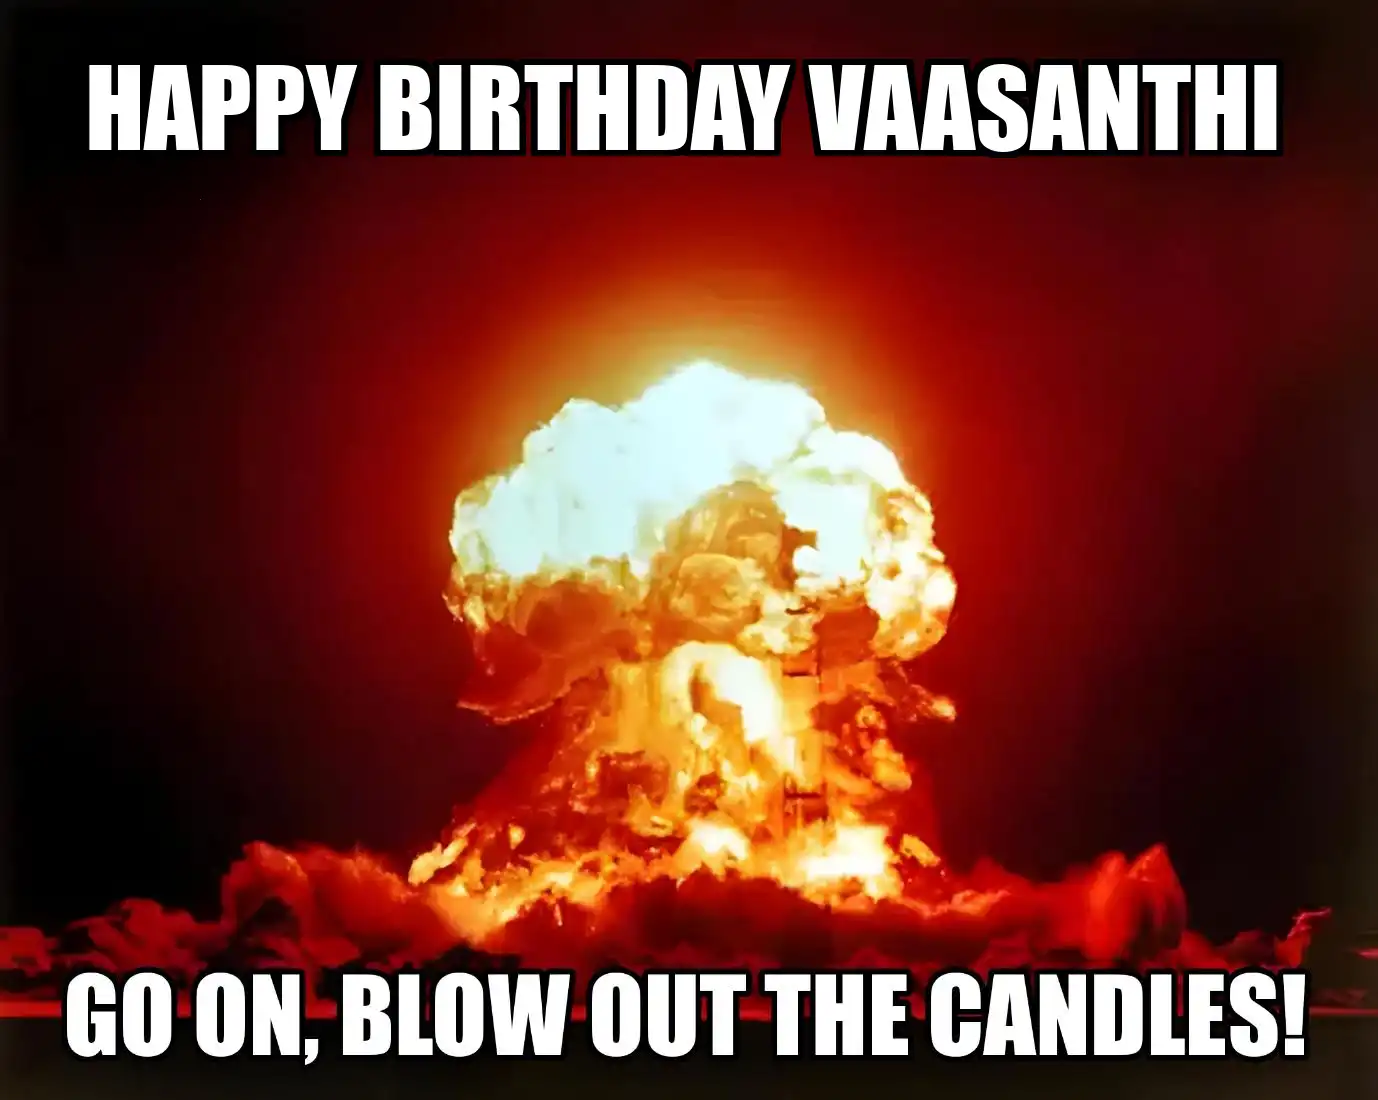 Happy Birthday Vaasanthi Go On Blow Out The Candles Meme